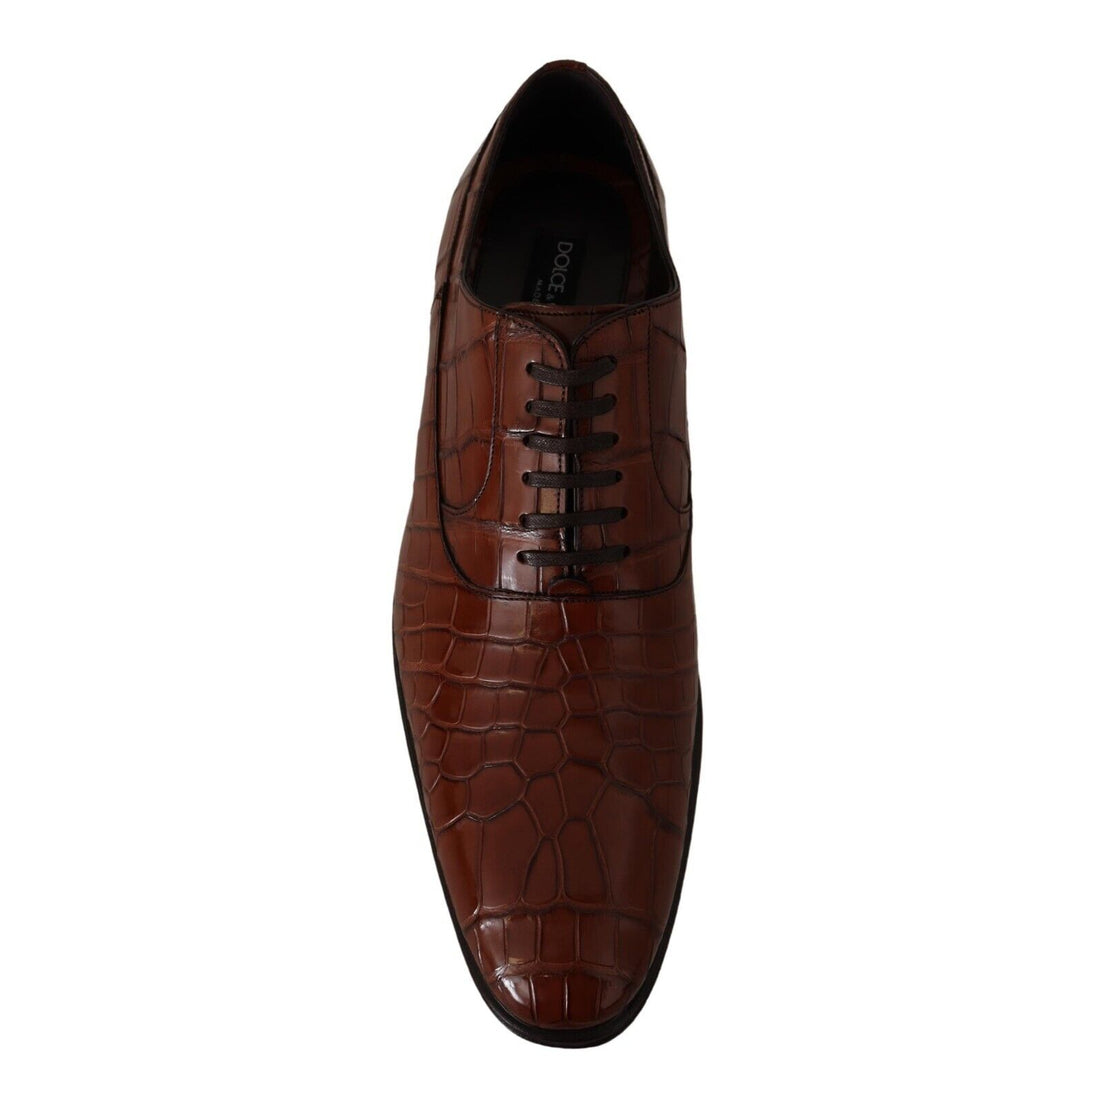 Dolce & Gabbana Brown Crocodile Leather Mens Formal Derby Shoes